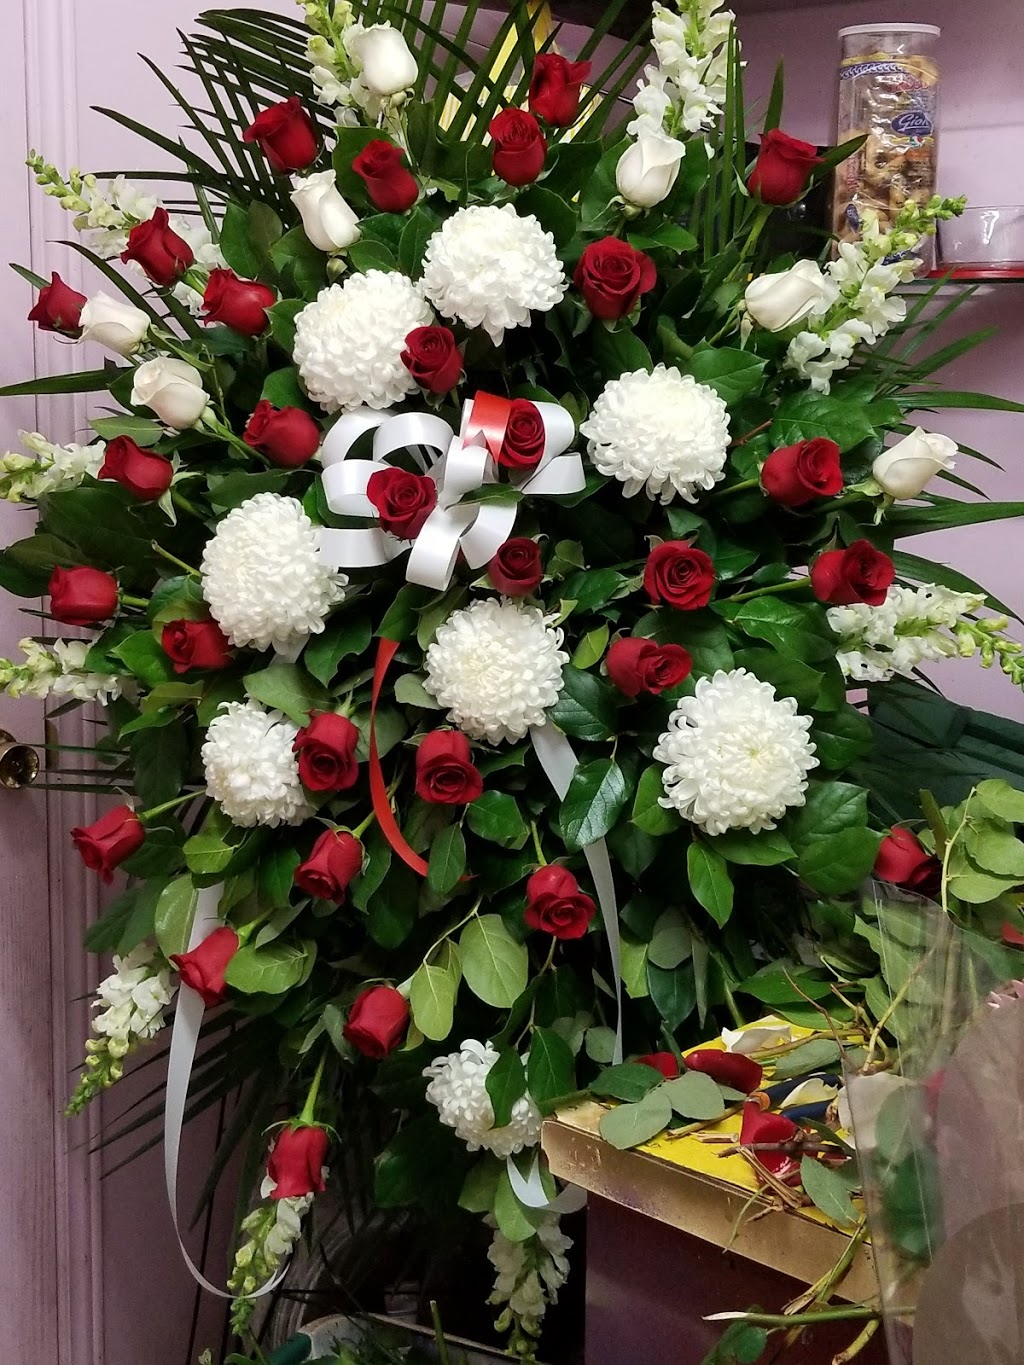 Toms Flower & Gift | florist | 1863 Eglinton Ave W, York, ON M6E 3X2, Canada | 4169399279 OR +1 416-939-9279